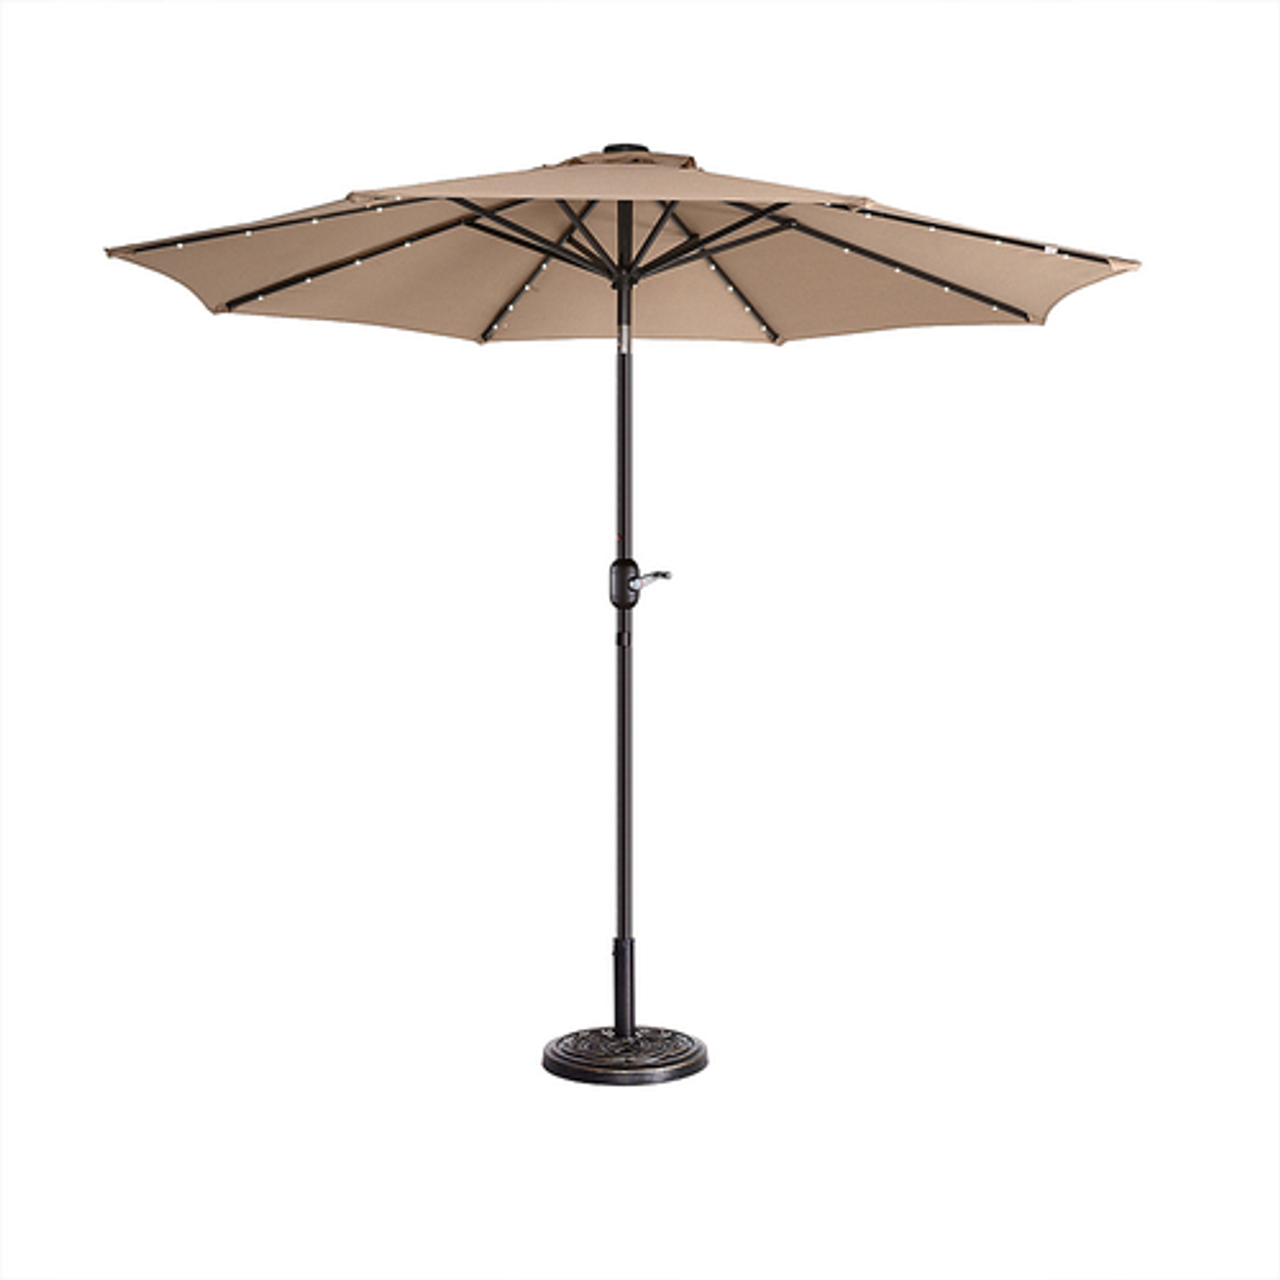 Nature Spring - 9' LED Lighted Outdoor Patio Umbrella with 8 Steel Ribs and Push Button Tilt, Solar Powered Market Umbrella by (Beige) - Beige